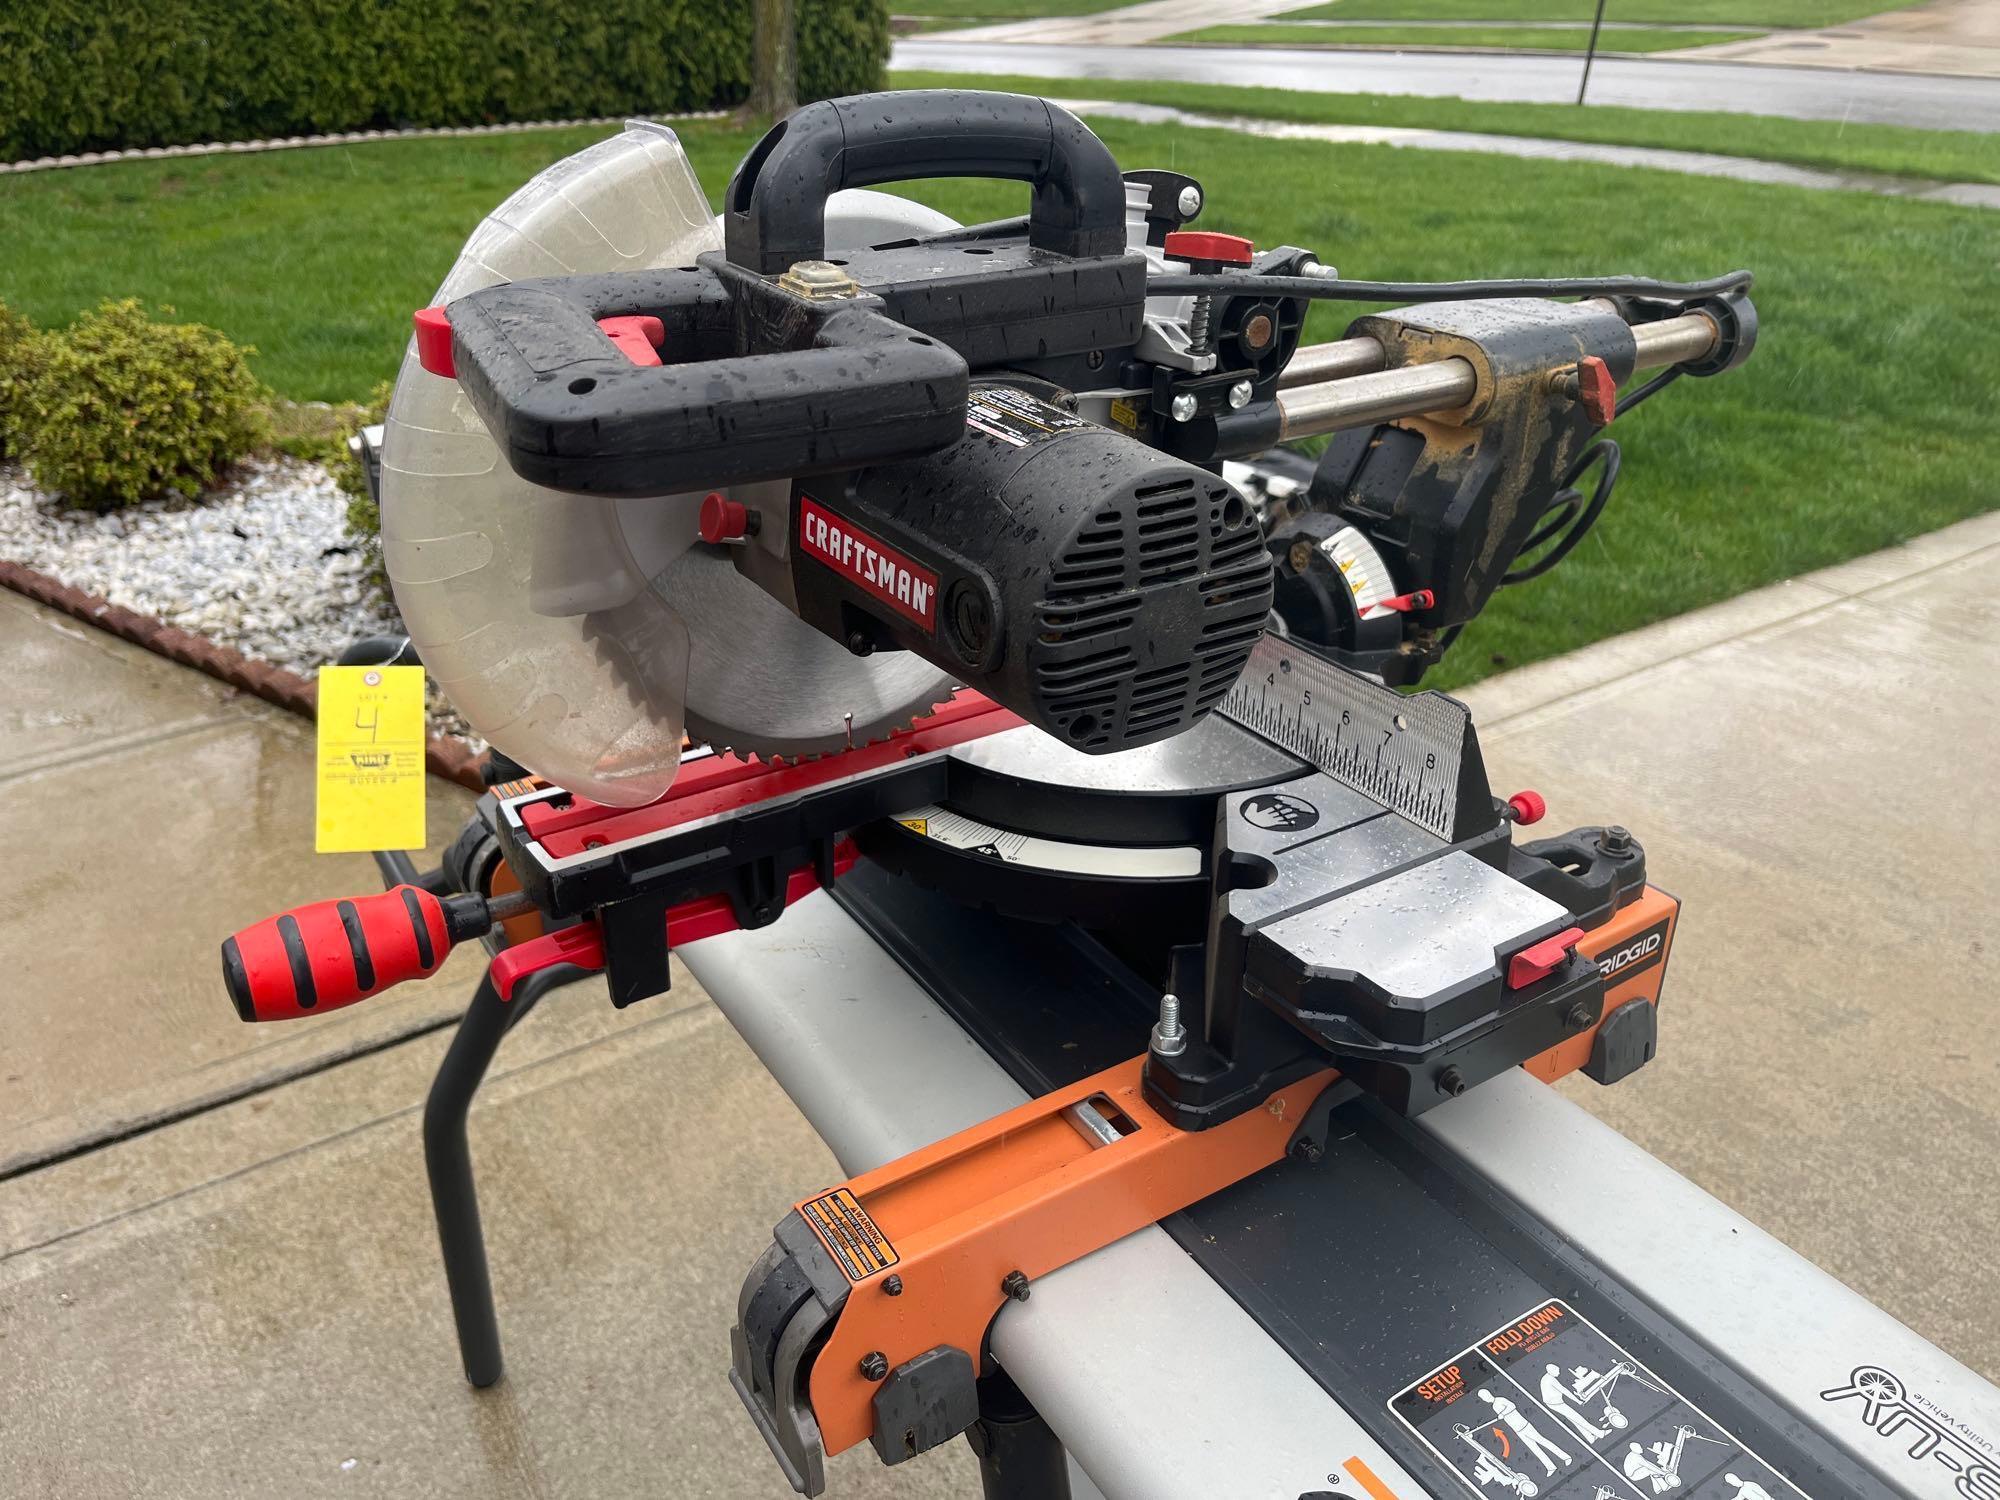 Craftsman 10in Compound Miter Saw with Laser Trac and Ridgid MS UV Miter Saw Utility Vehicle